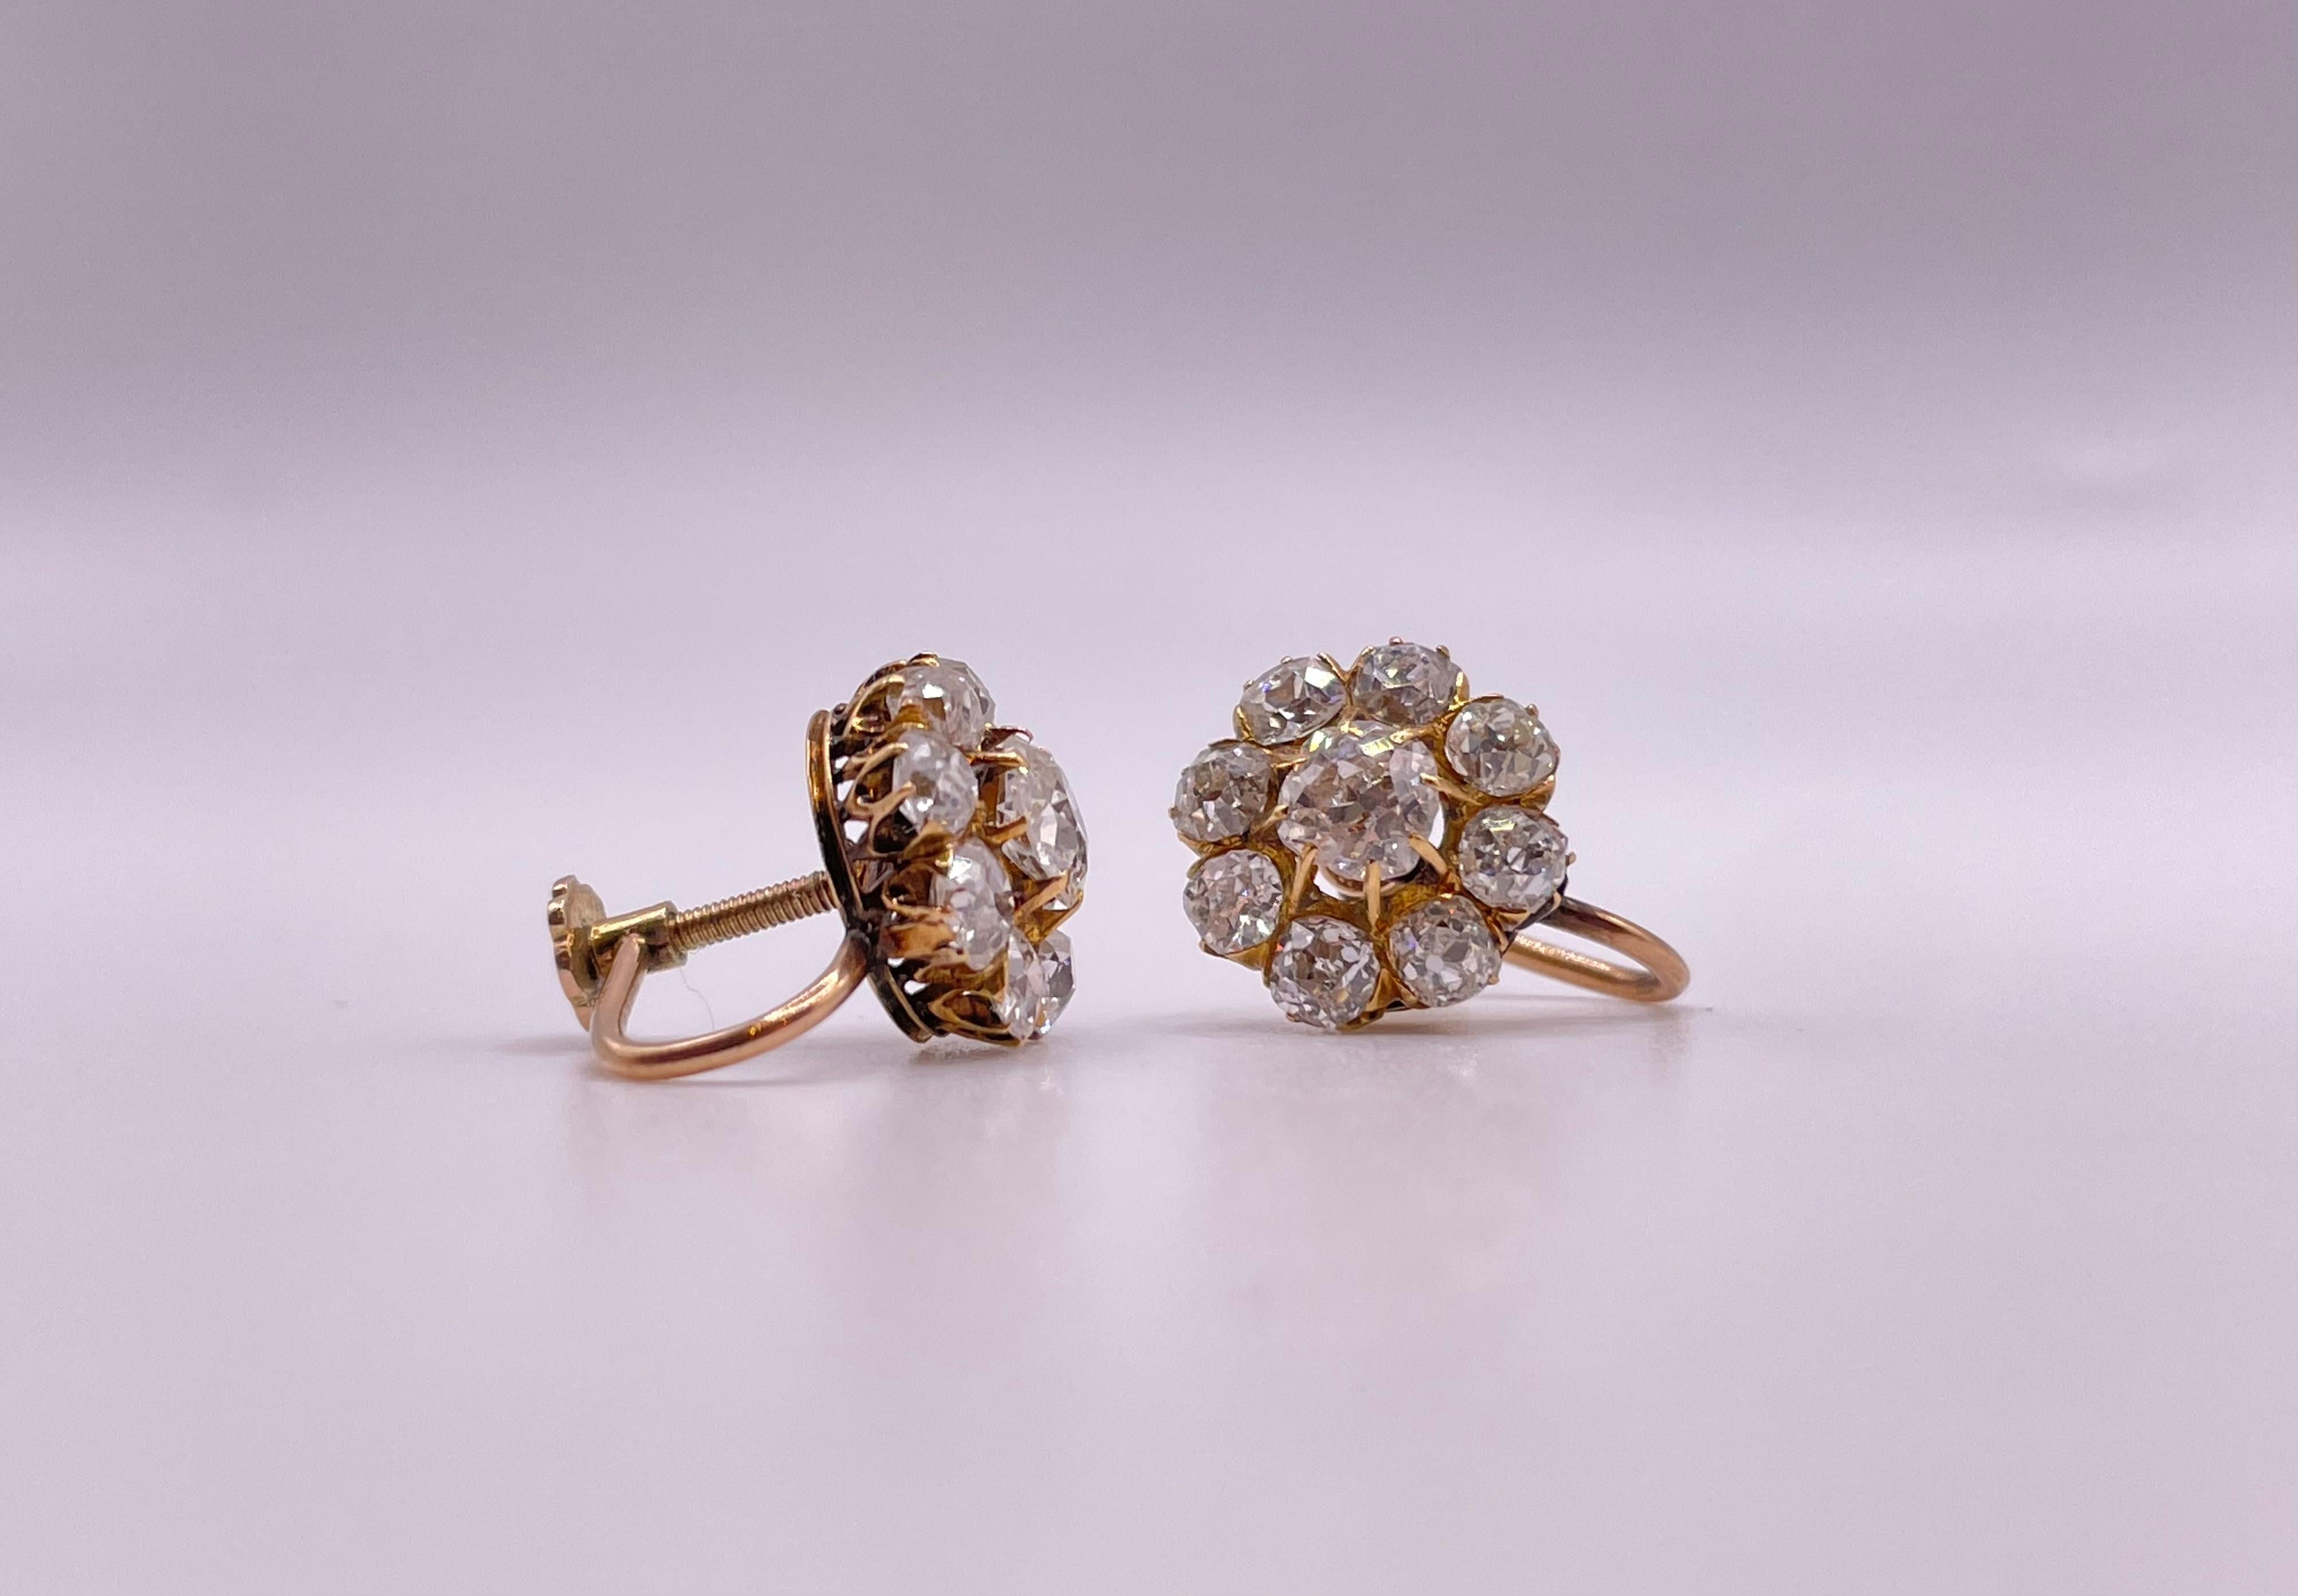 Antique 14k Gold Russian Old Mine Cut Diamond Earrings In Excellent Condition For Sale In Firenze, FI